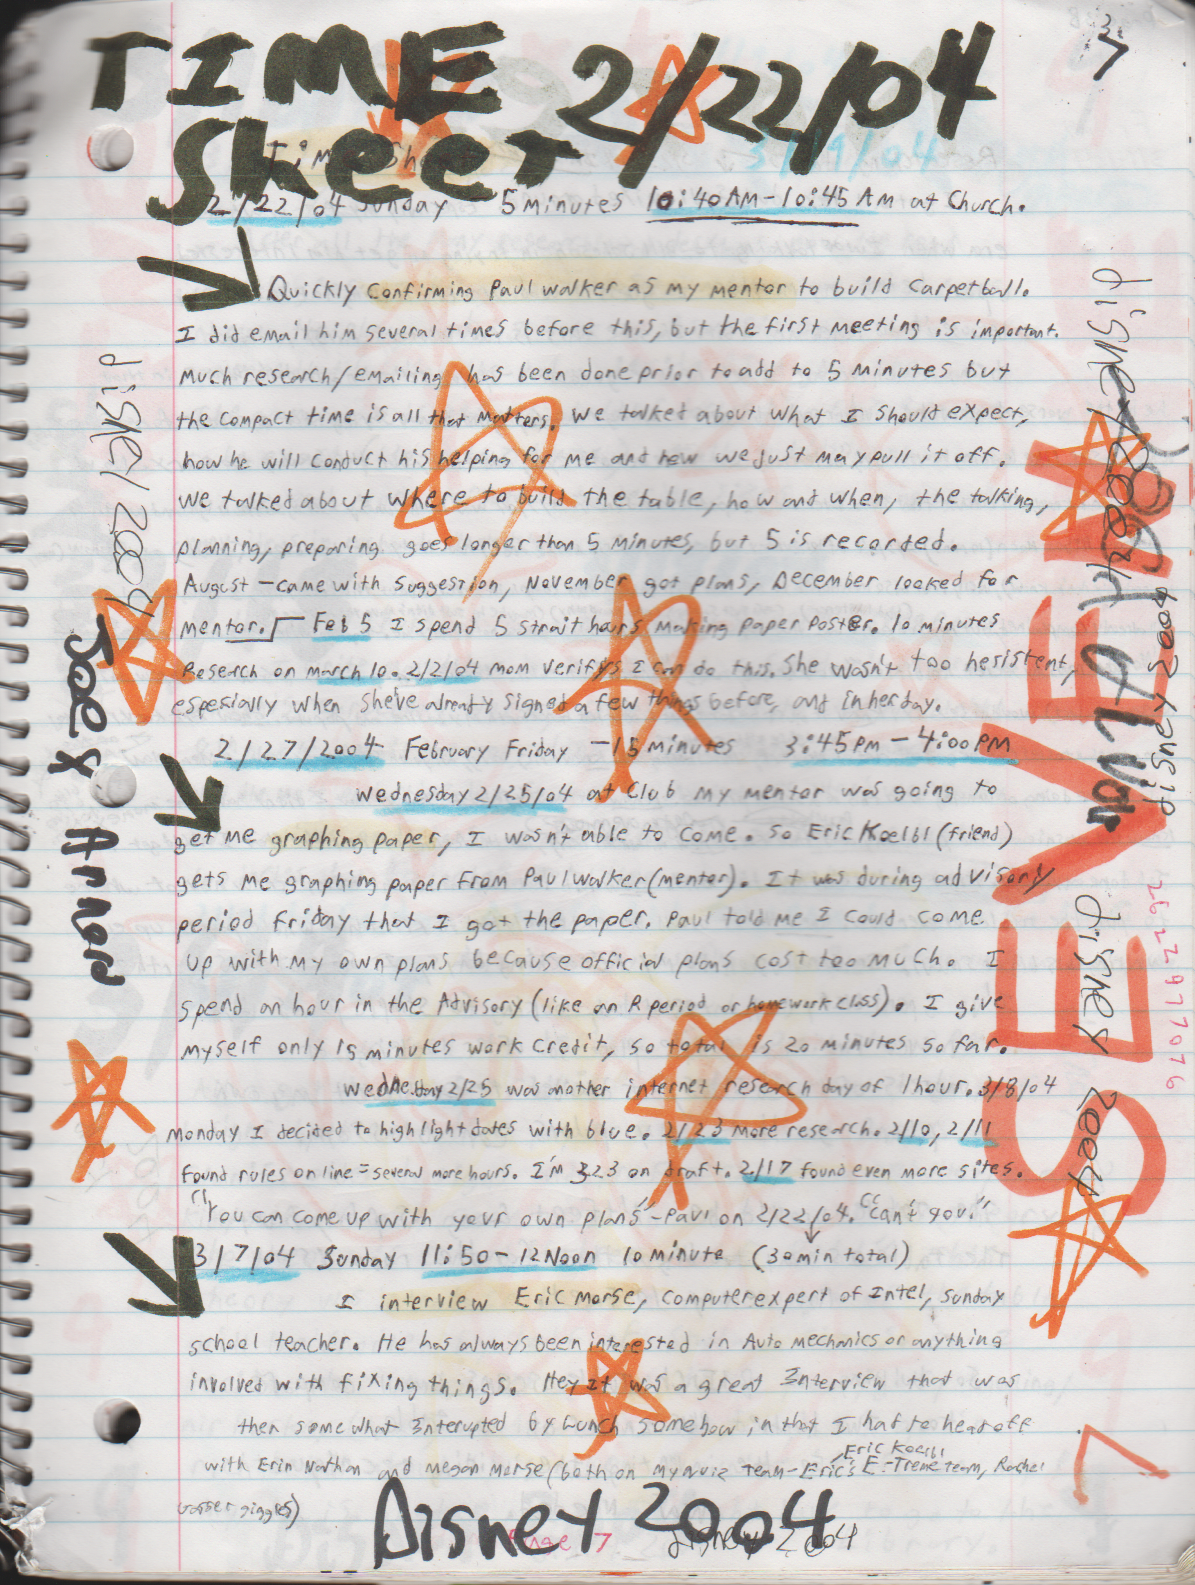 2004-01-29 - Thursday - Carpetball FGHS Senior Project Journal, Joey Arnold, Part 02, 96pages numbered, Notebook-02.png